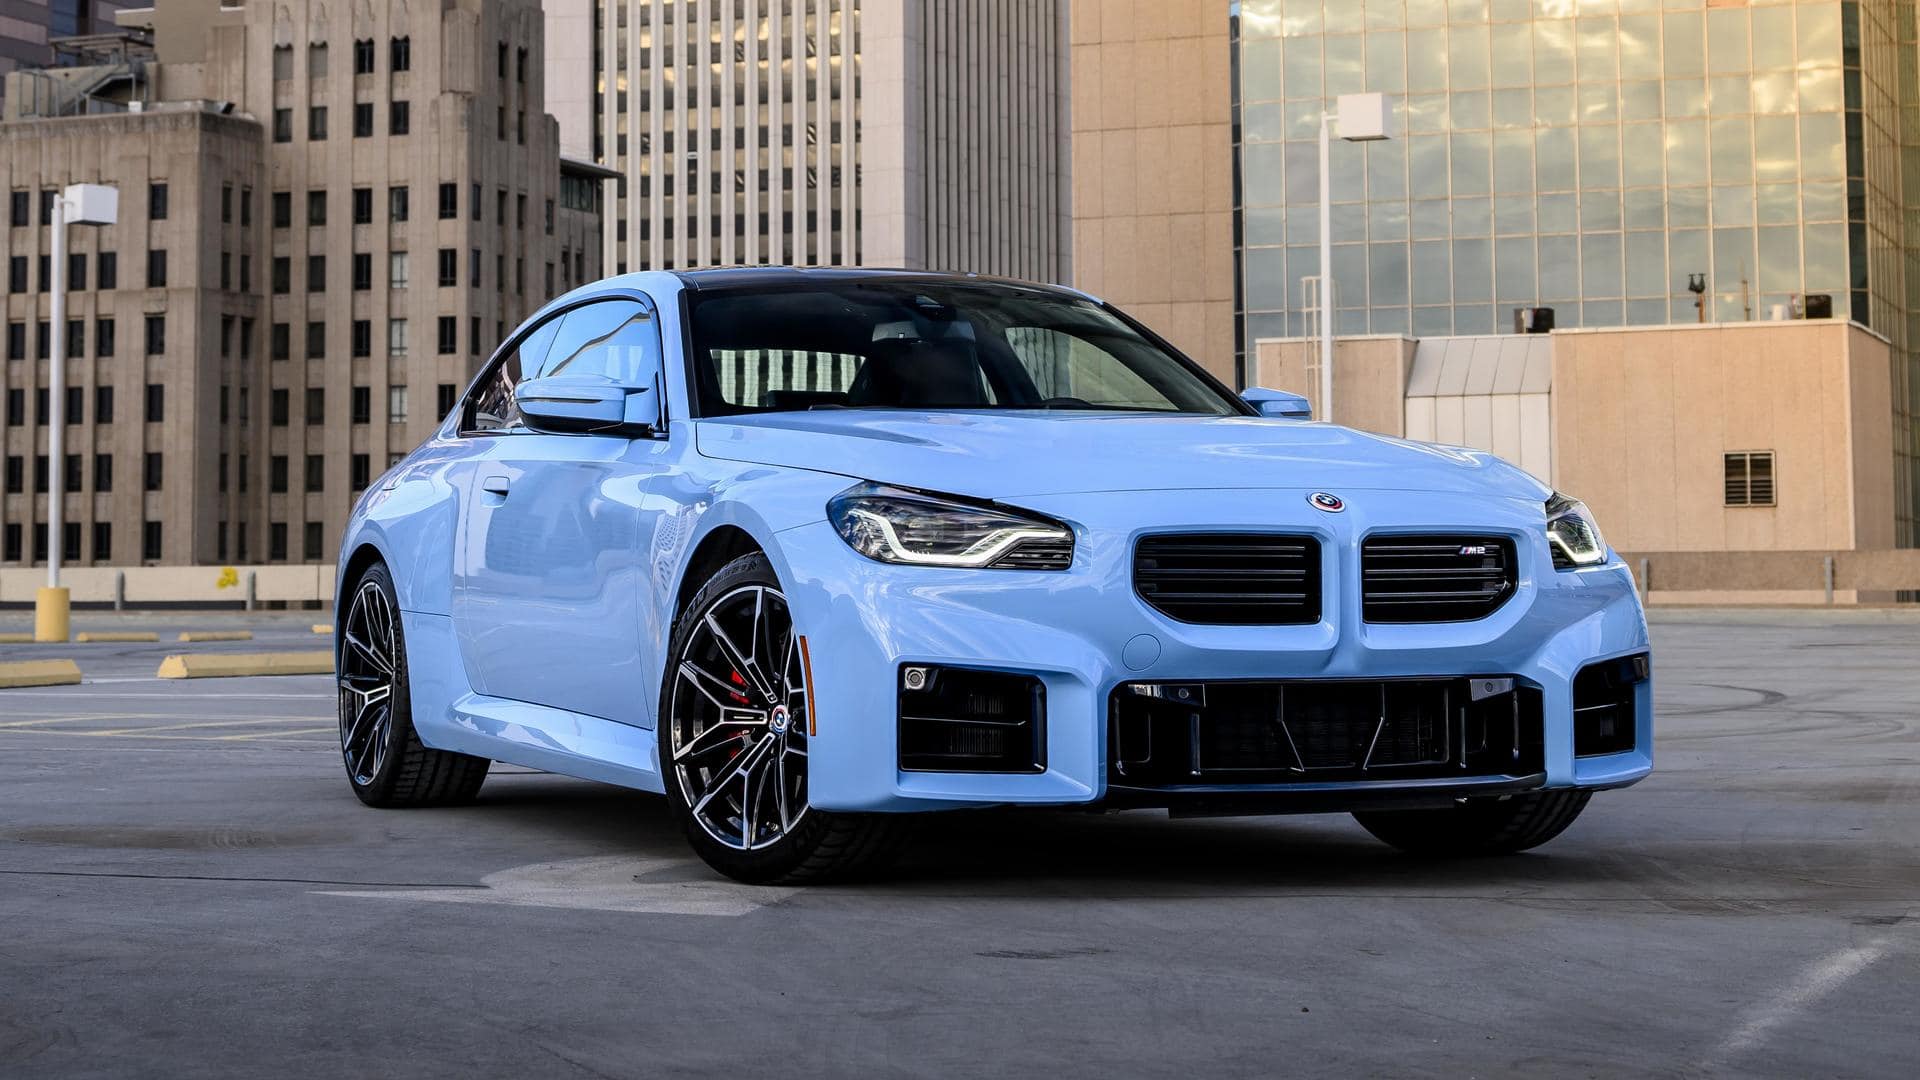 2023 BMW M2 arrives in India at Rs. 98 lakh